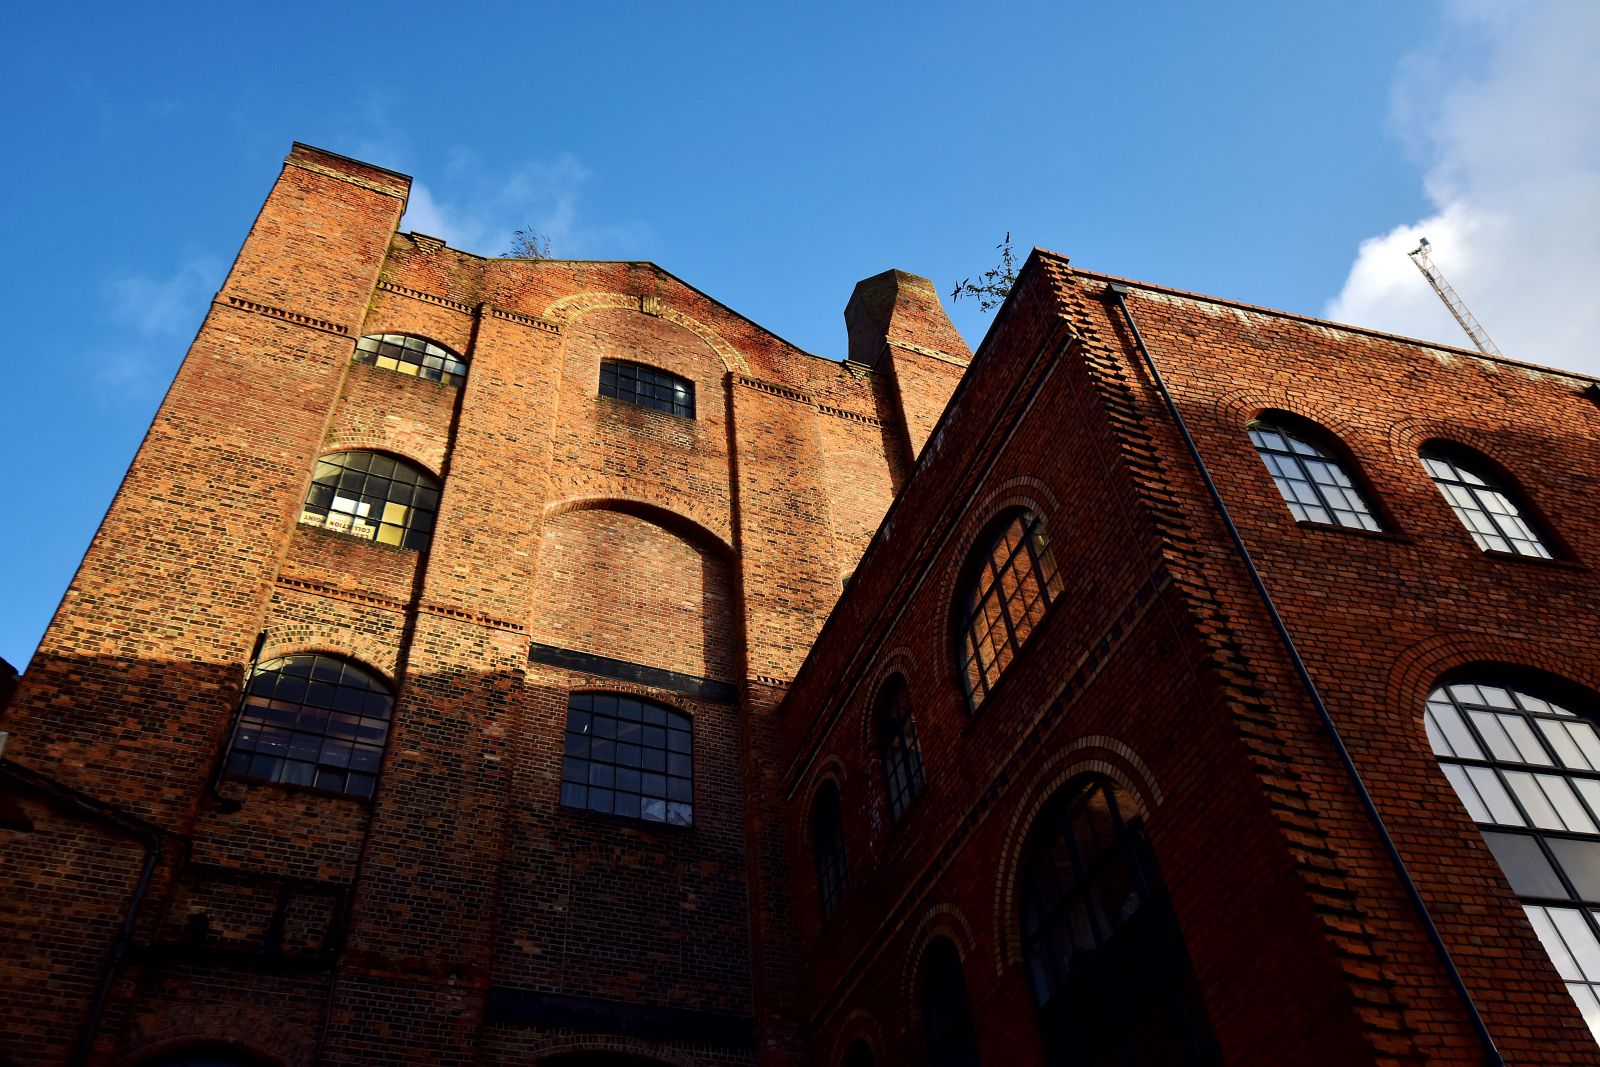 The factory building was once home to long-running retailer Gardiner Haskins. 